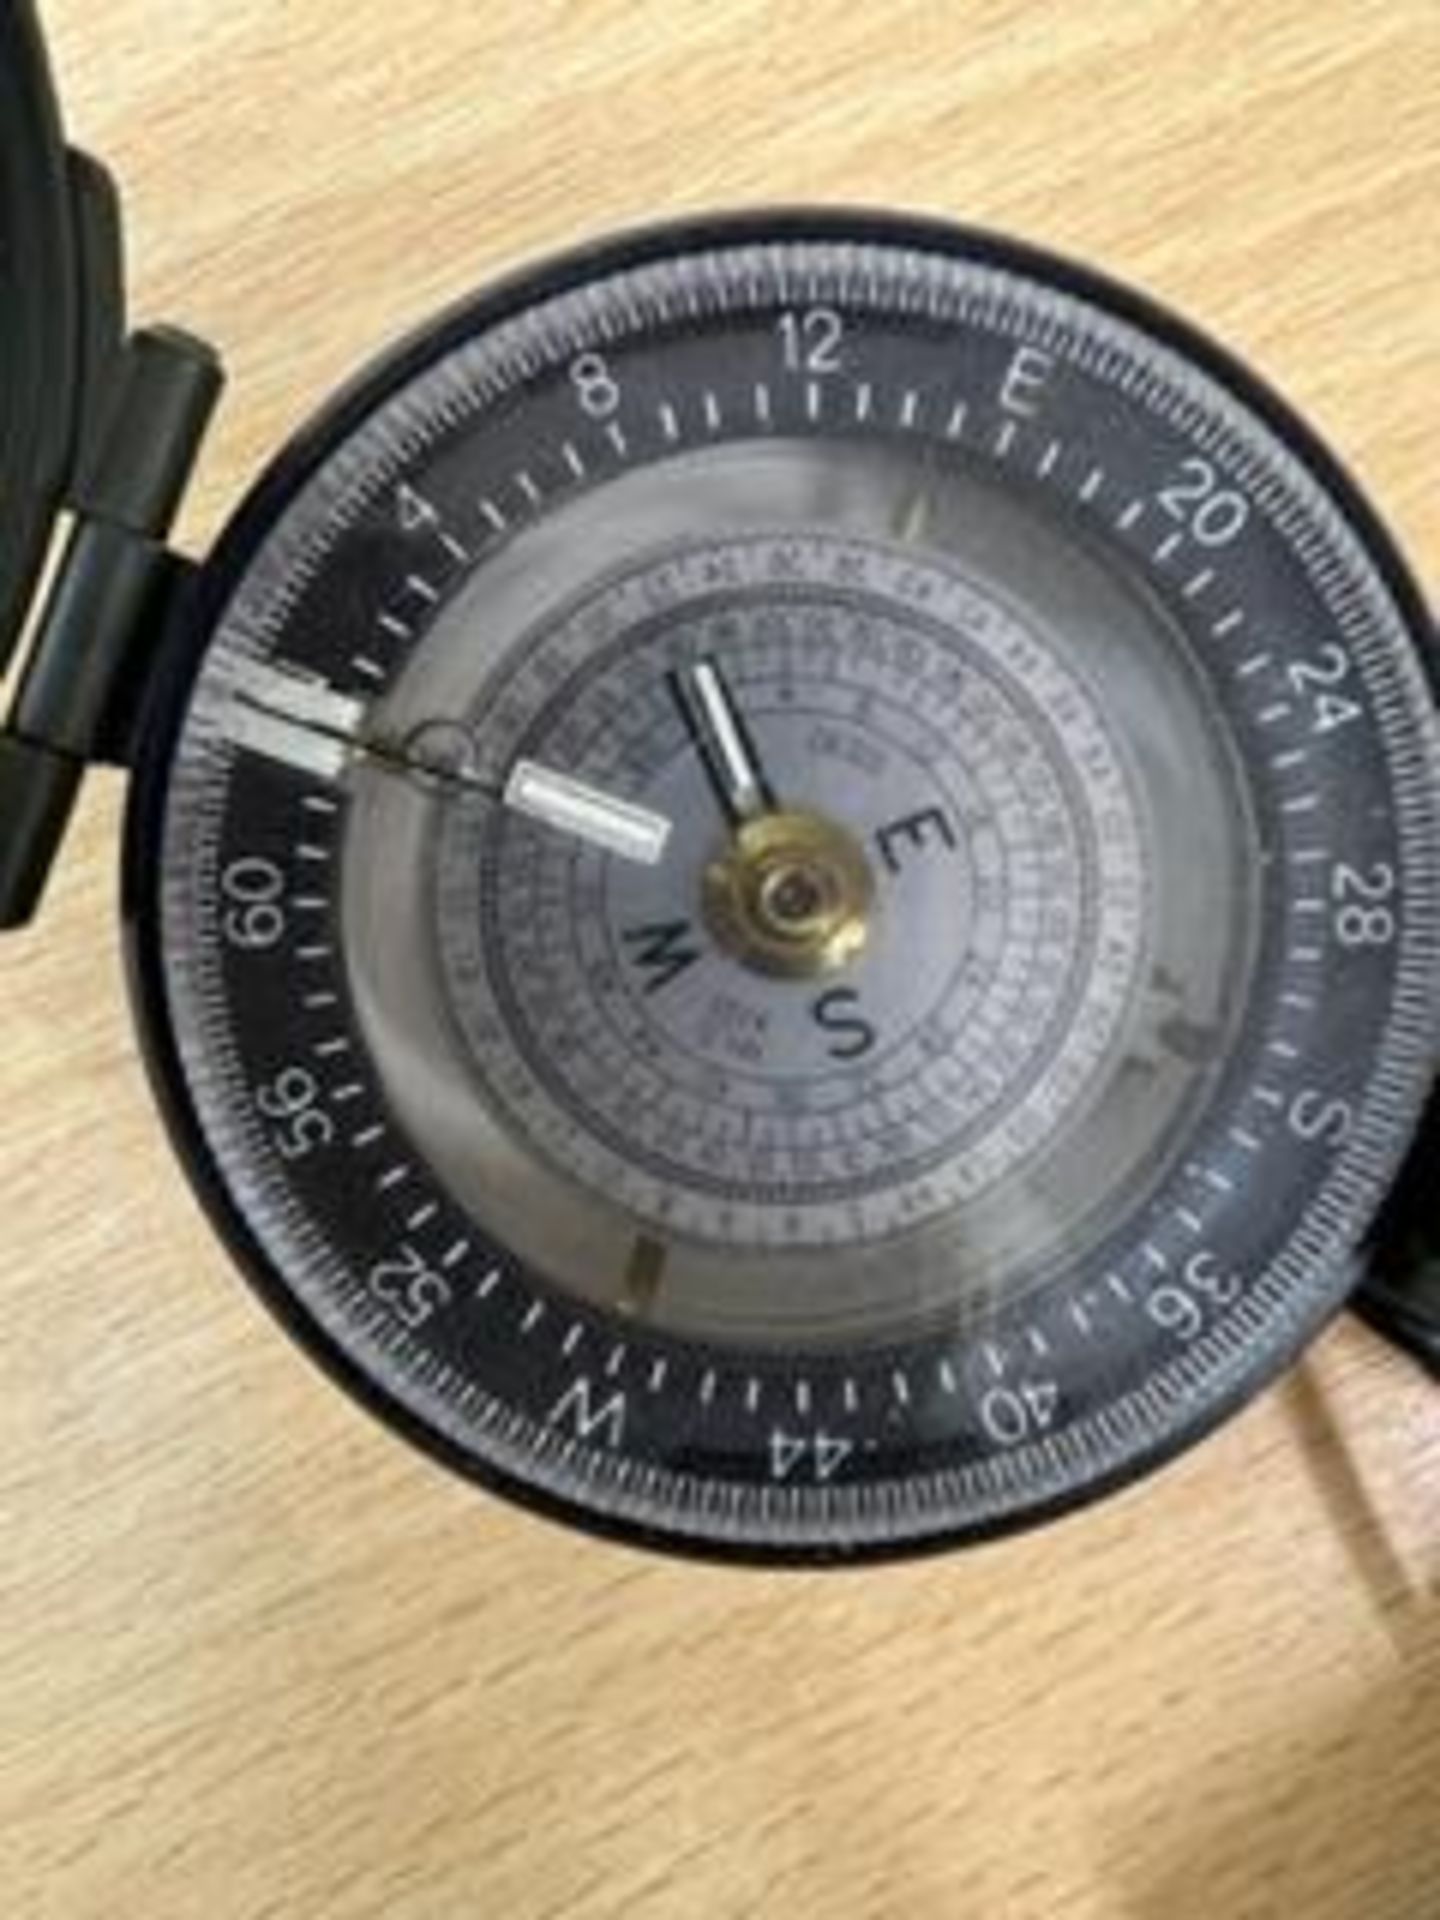 UNISSUED FRANCIS BAKER BRITISH ARMY PRISMATIC COMPASS NATO MARKS IN MILS - Image 4 of 7